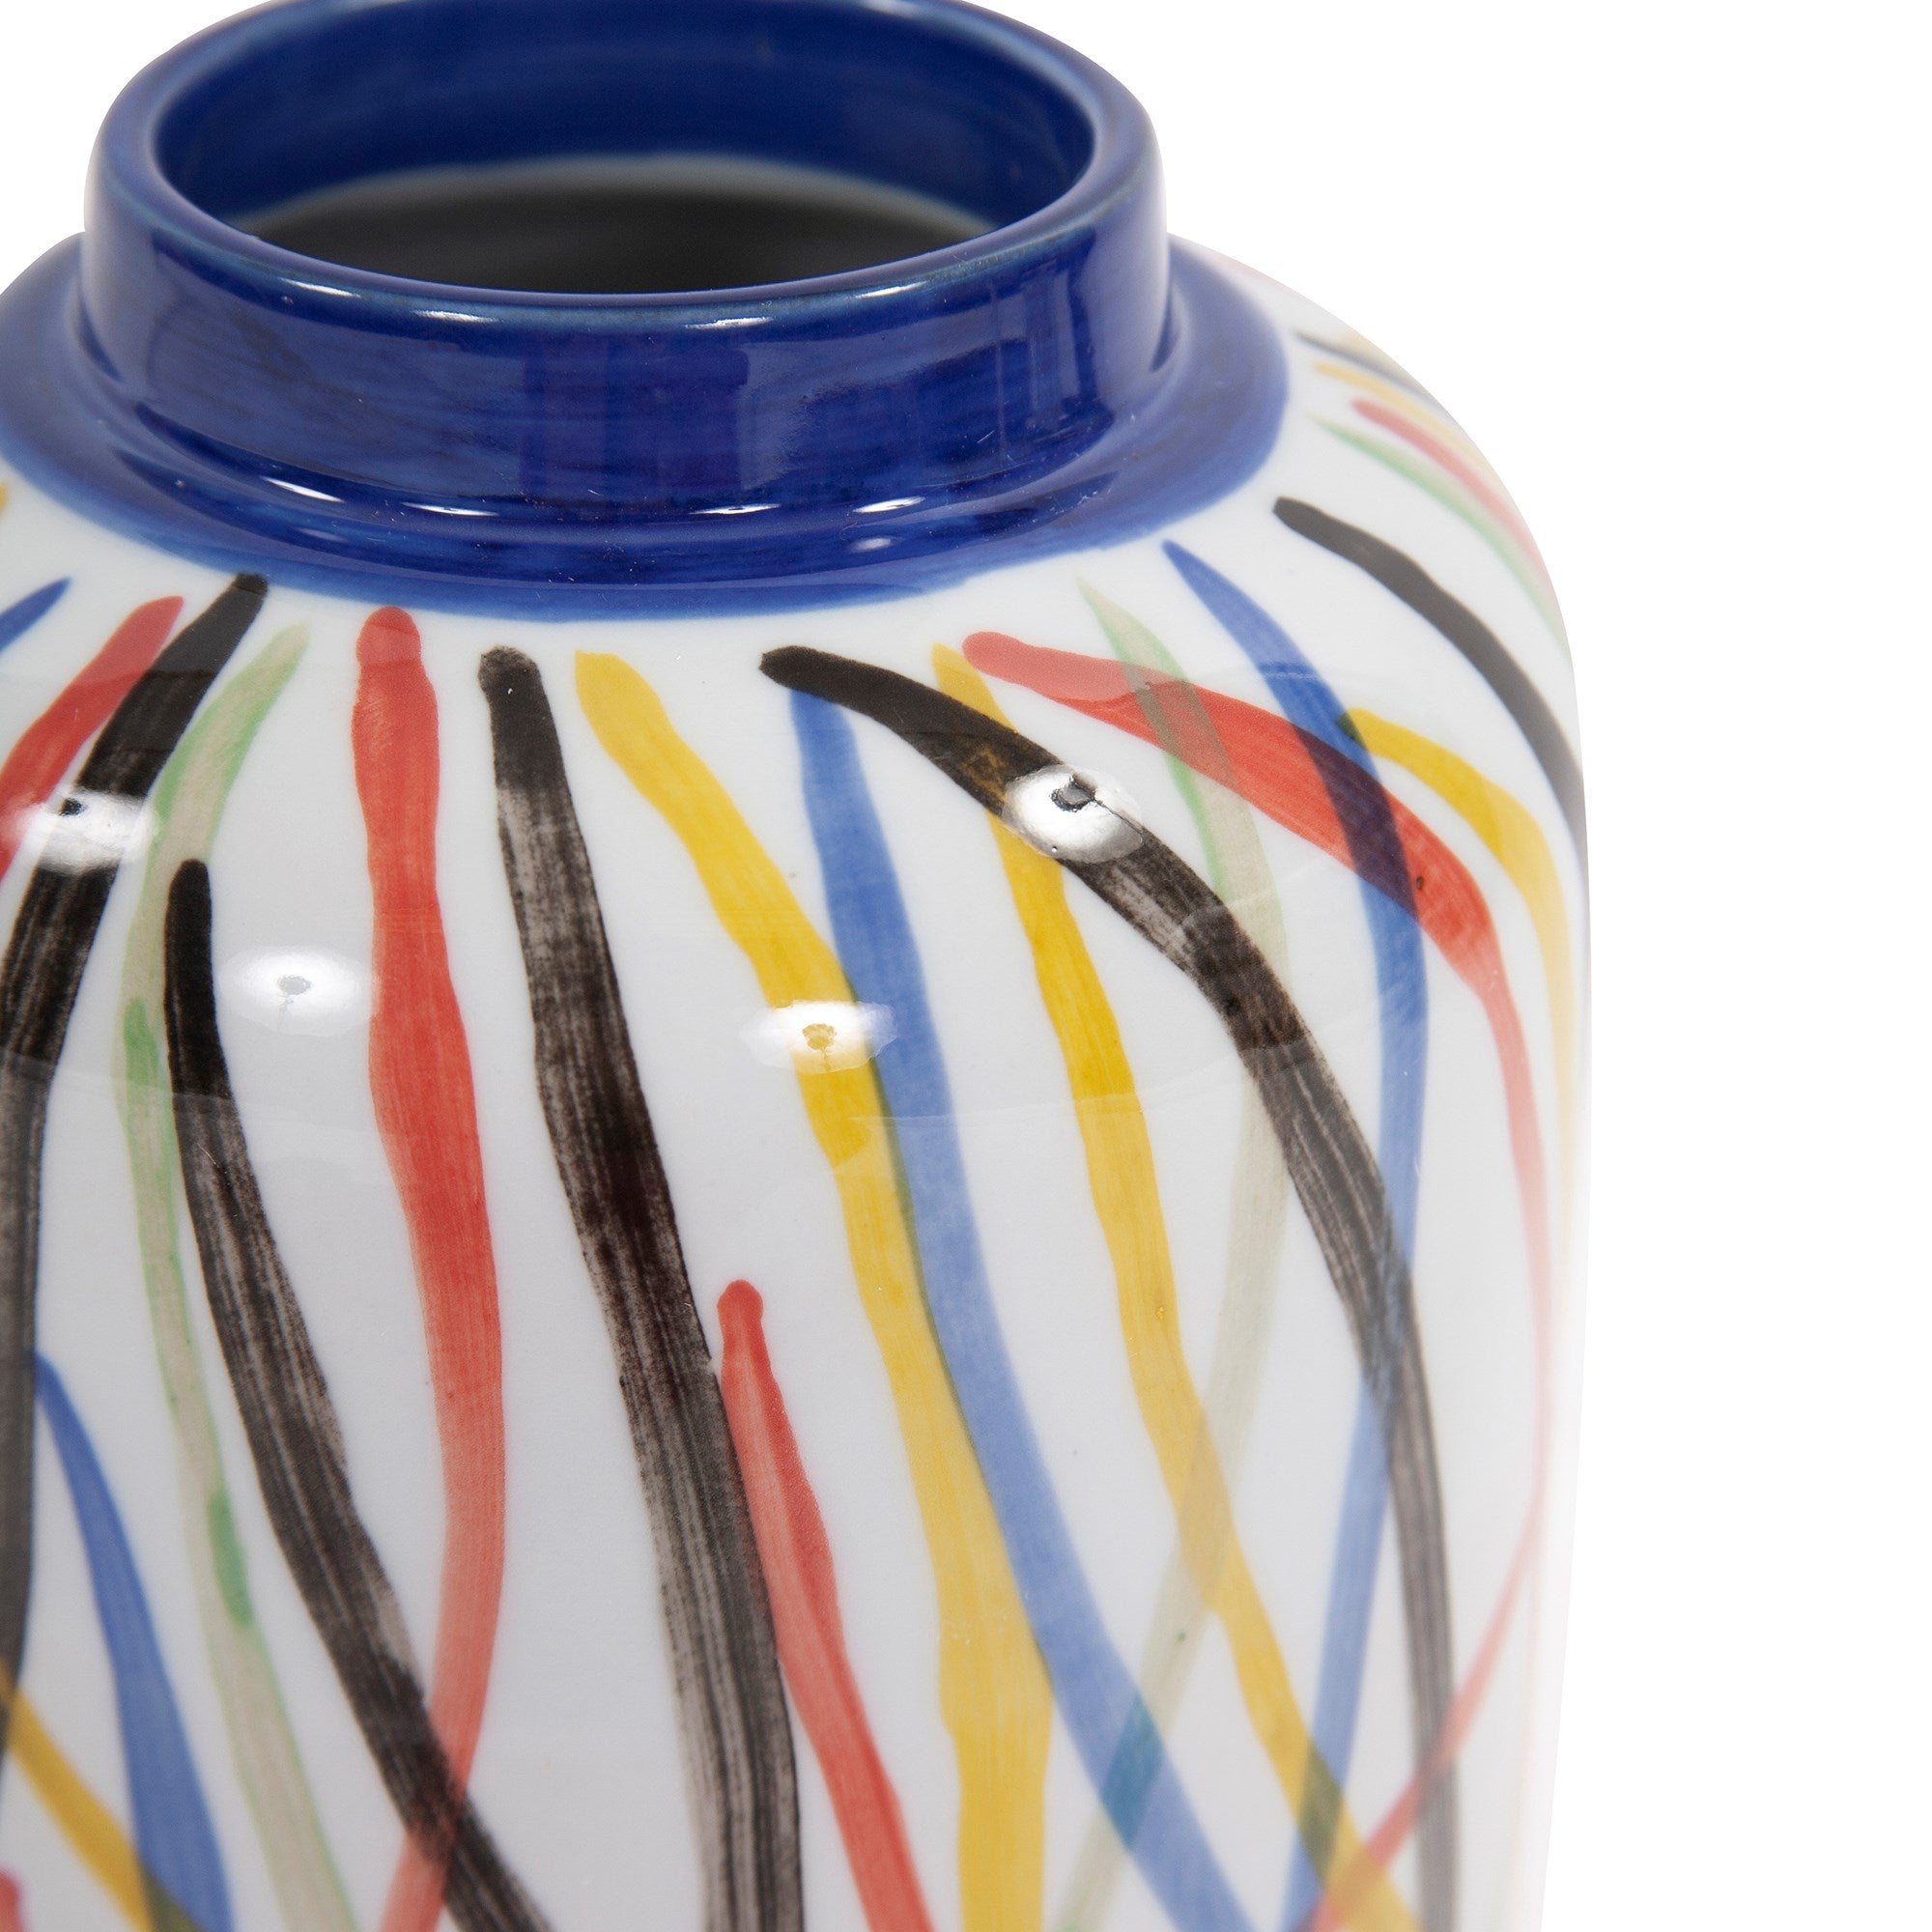 Color Web Ceramic Cylindrical Vase, Small